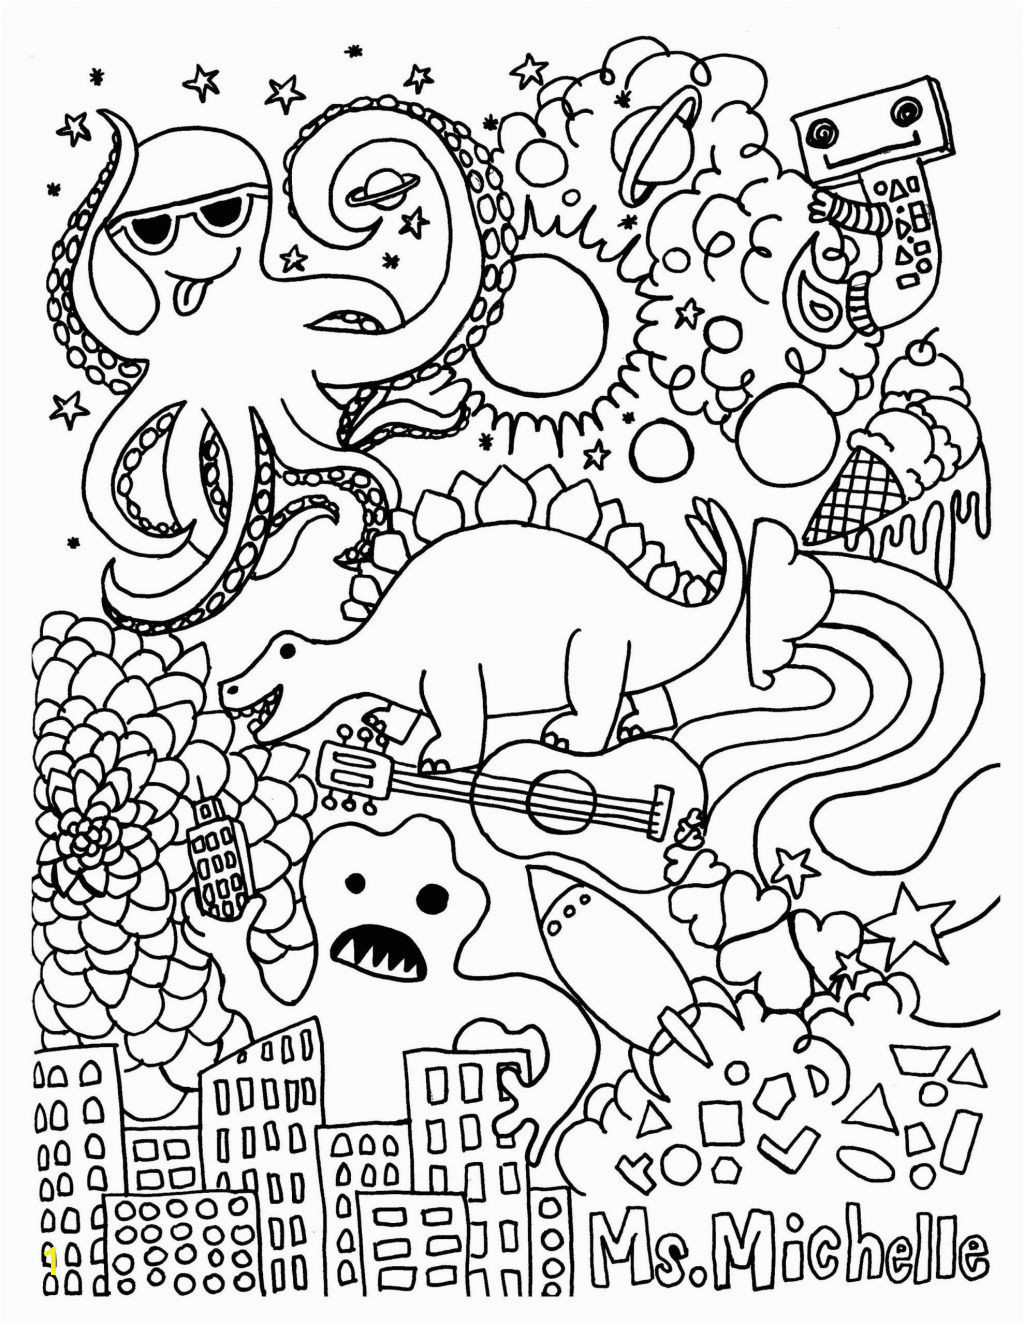 preschool summer coloring pages fresh coloring book astonishing fruit the spirit coloring of preschool summer coloring pages 1024x1325